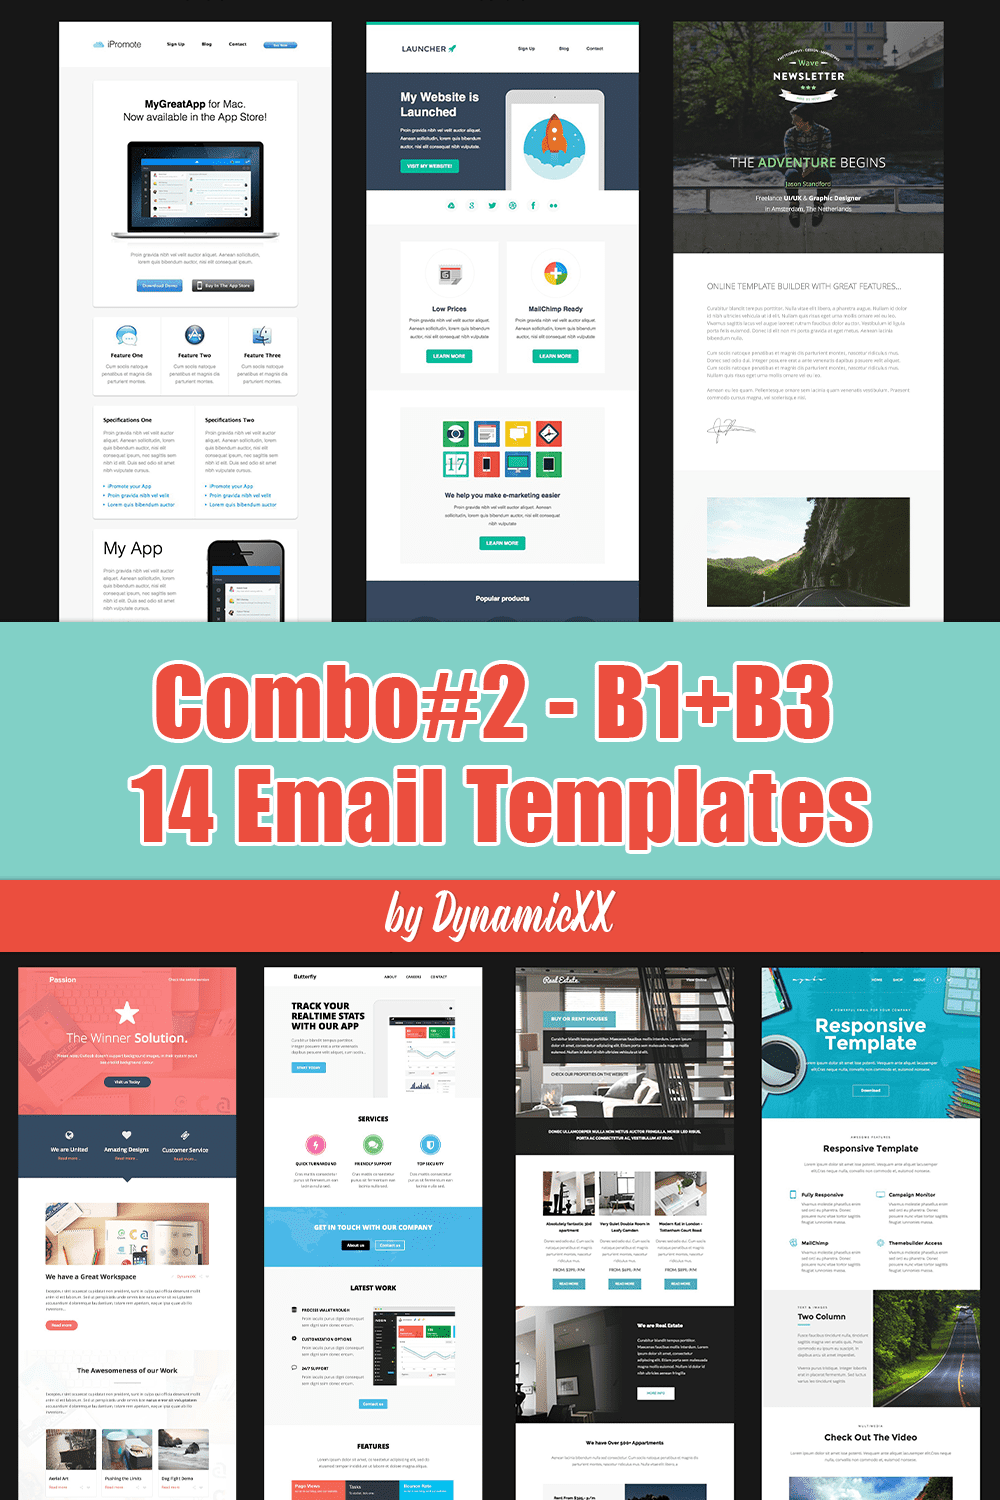 Collection of images of beautiful email design templates.